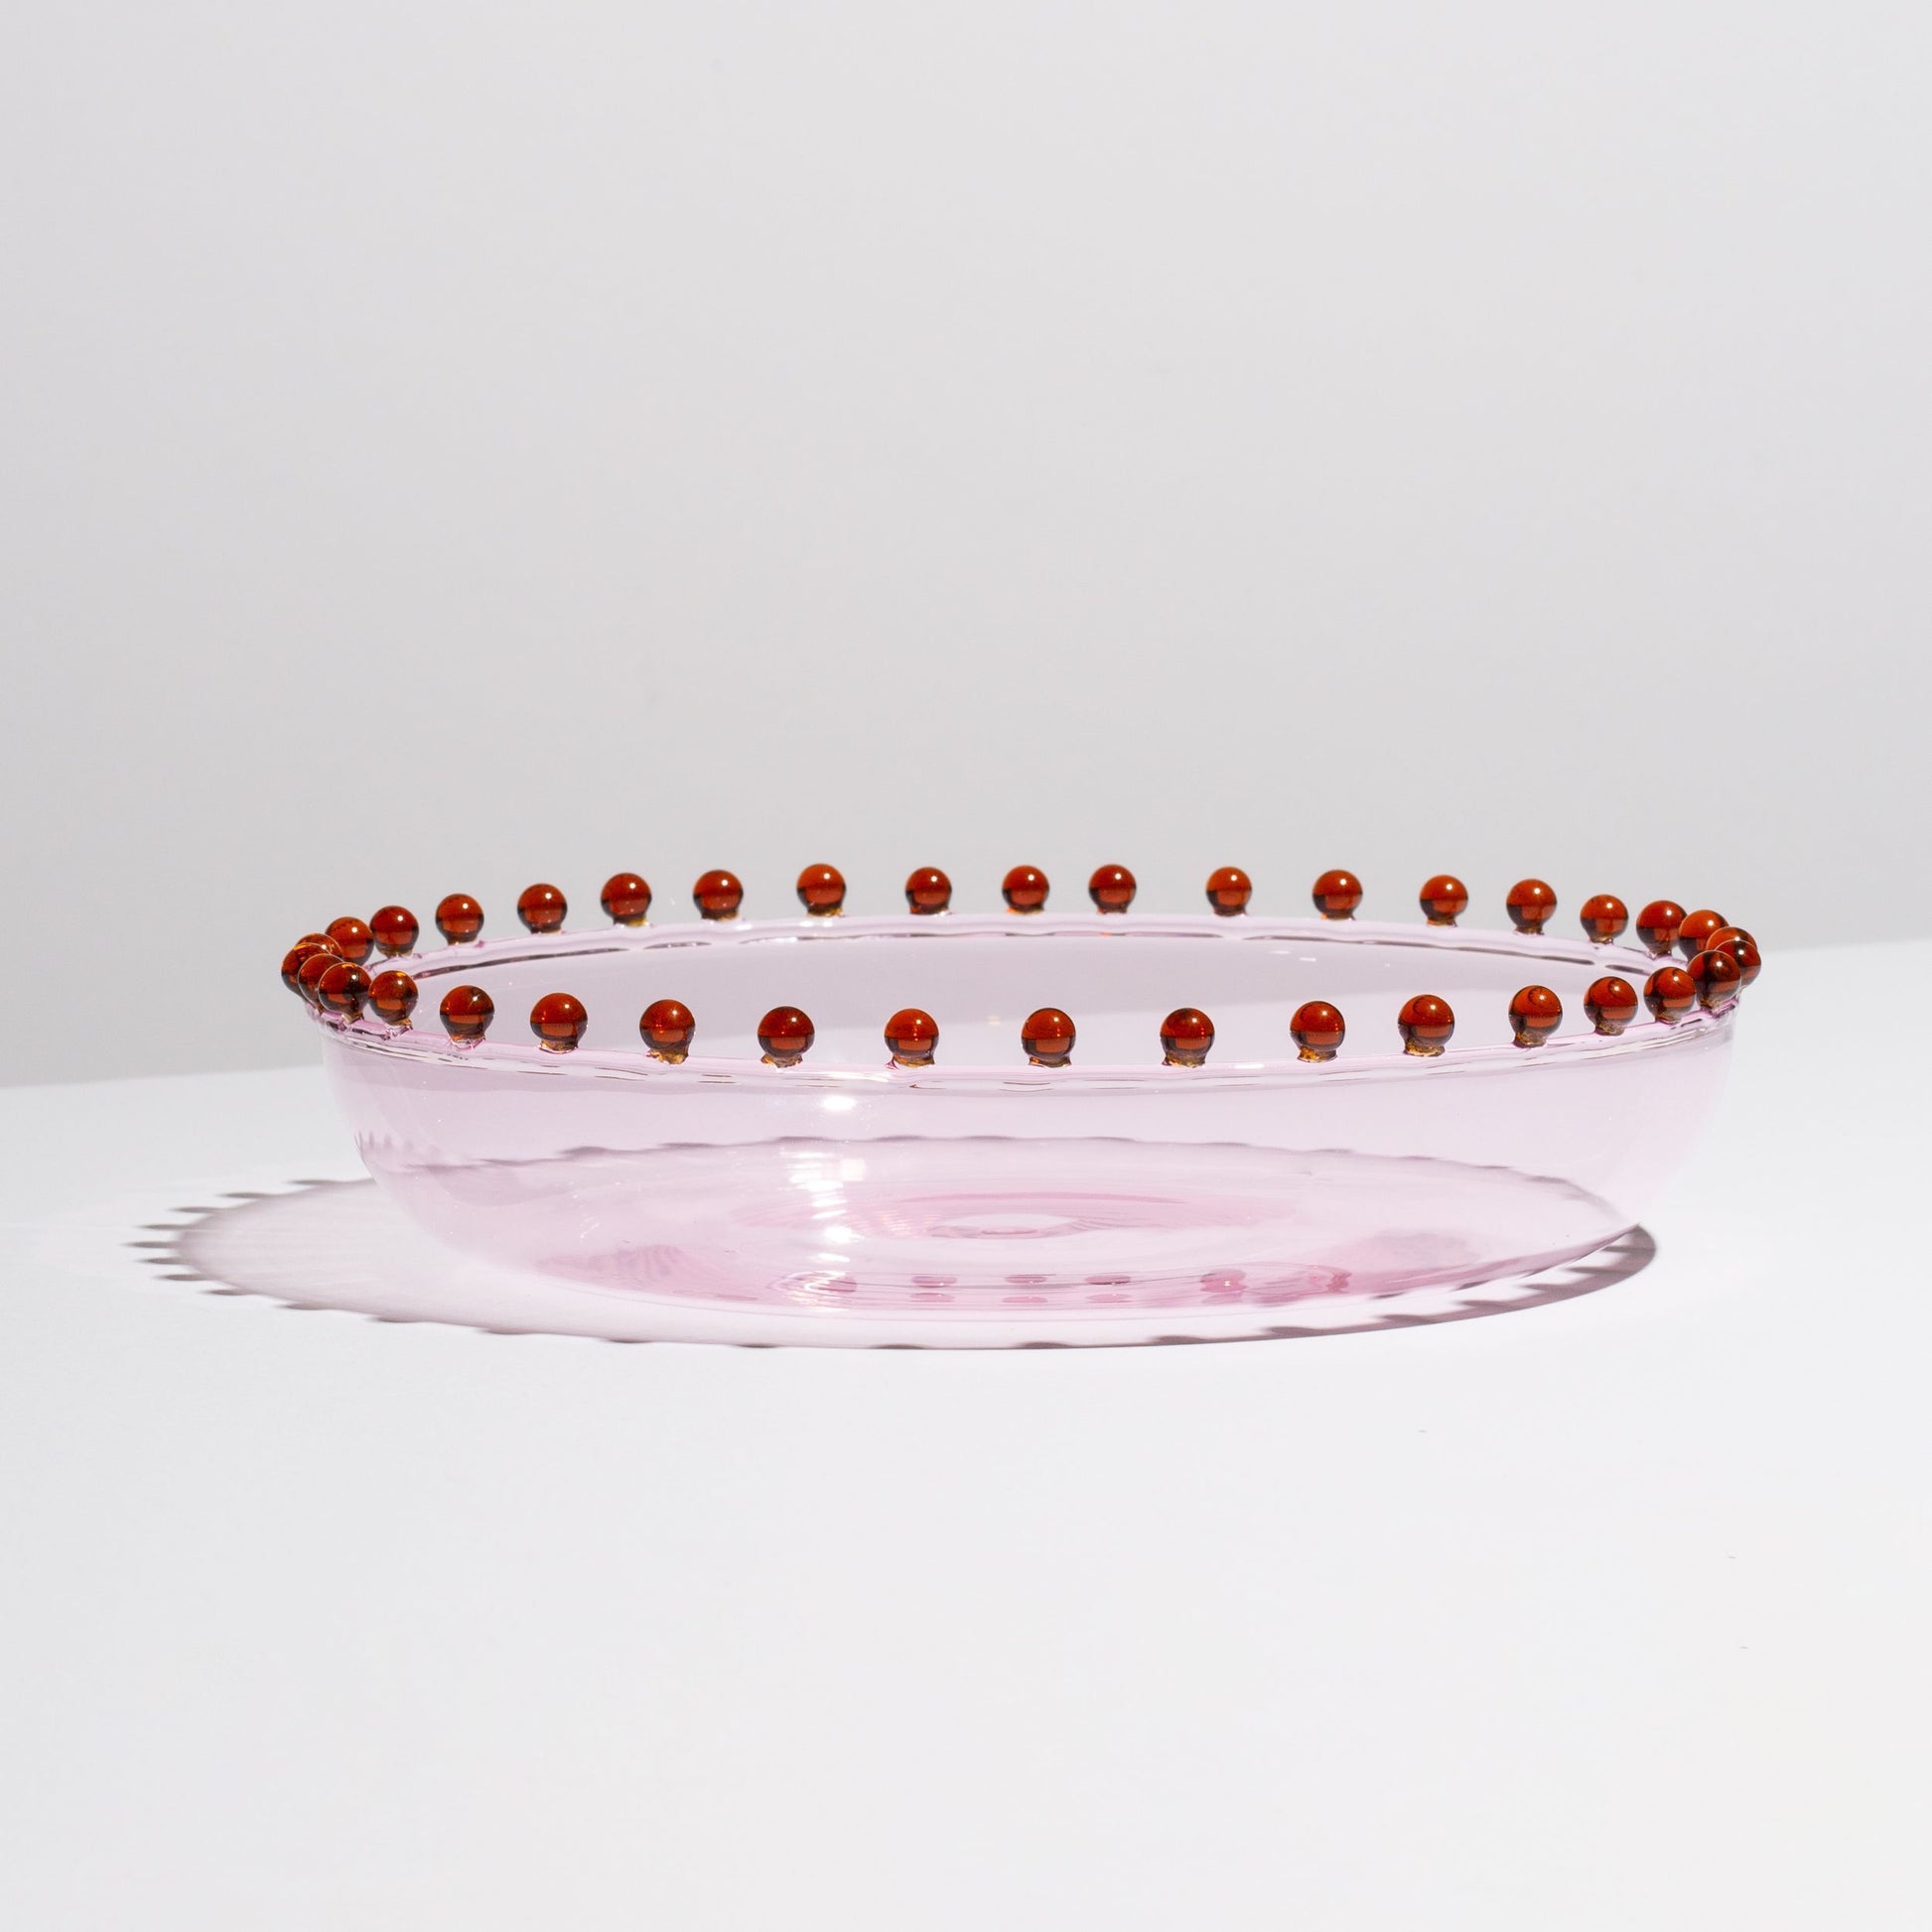 The shape lends itself beautifully to sharing all sweet or savoury dishes. Use the Pearl Platter for healthy summer salads, grilled shellfish with lemon, or apple crumble. This delicate piece is made for grown-ups and the fanciest of soirees.